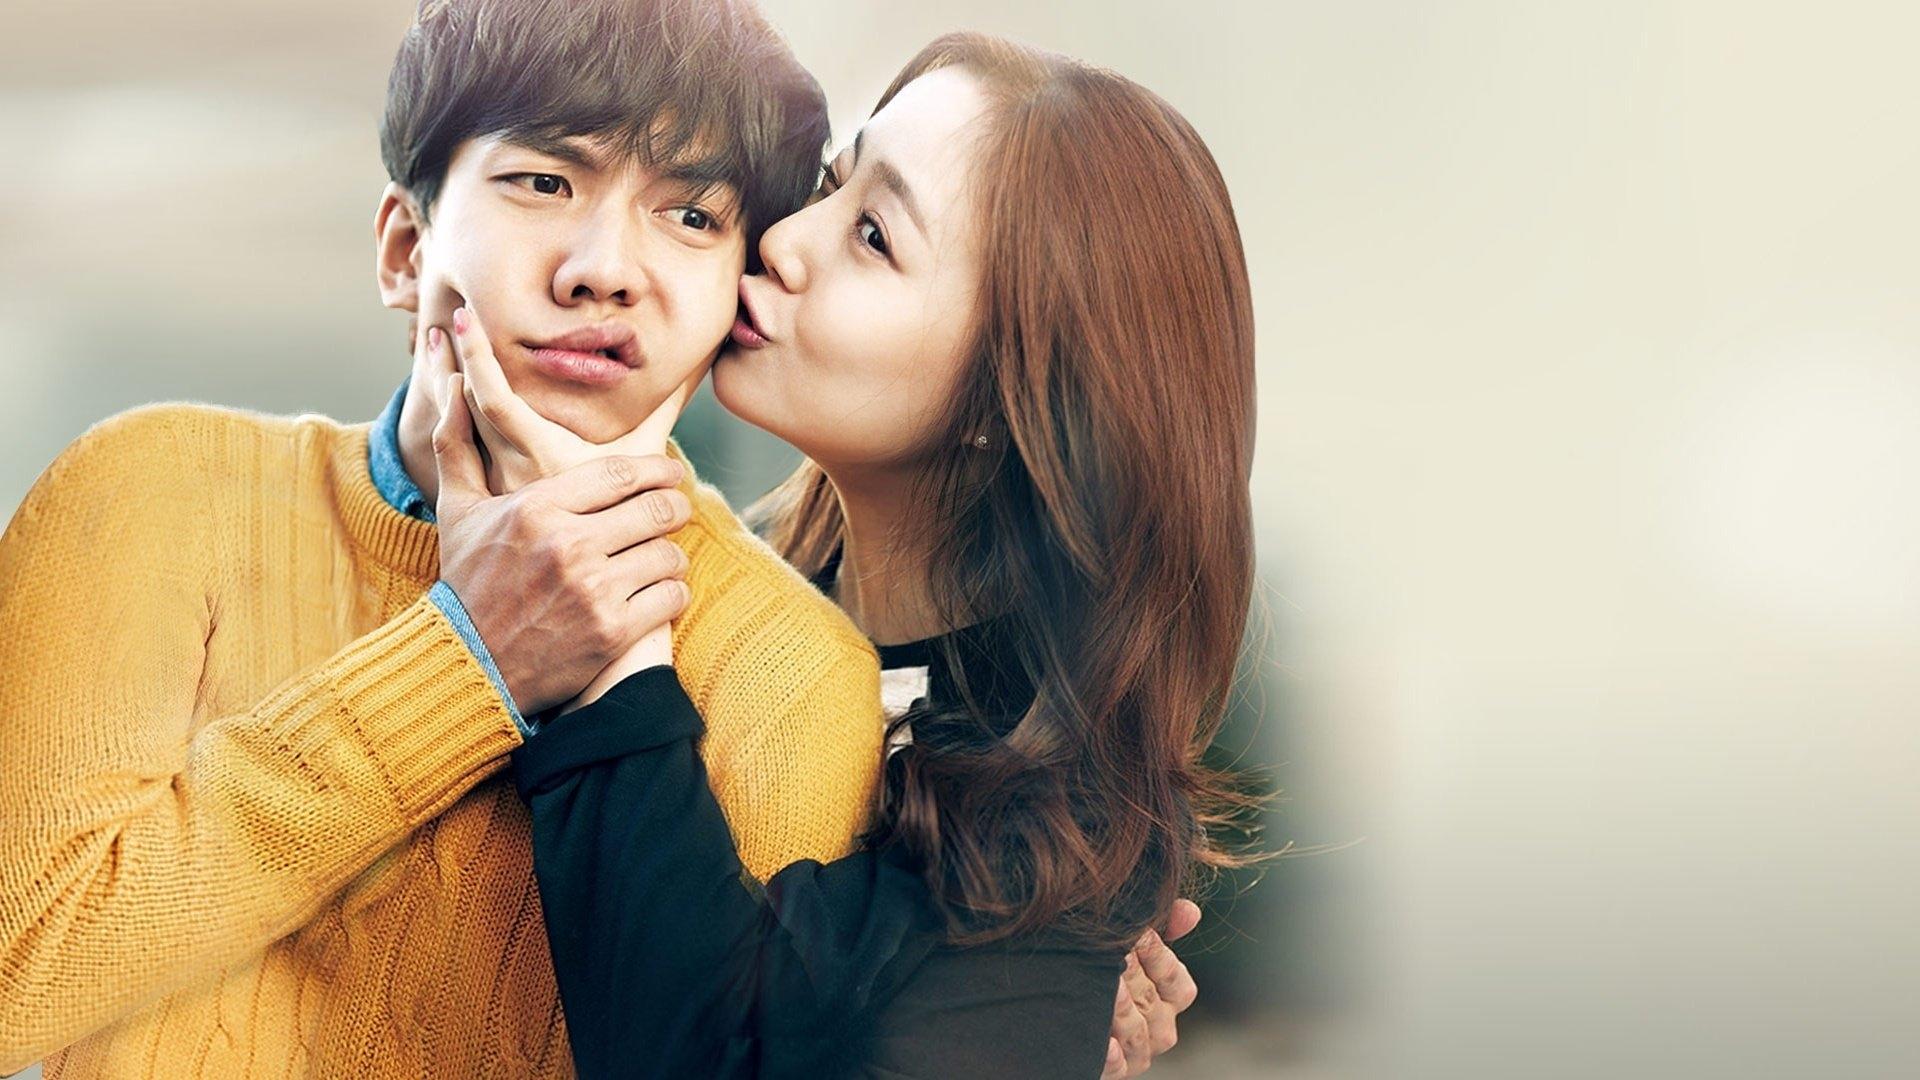 Love Forecast Moon Chae Won And Lee Seung Gi Free Wallpaper